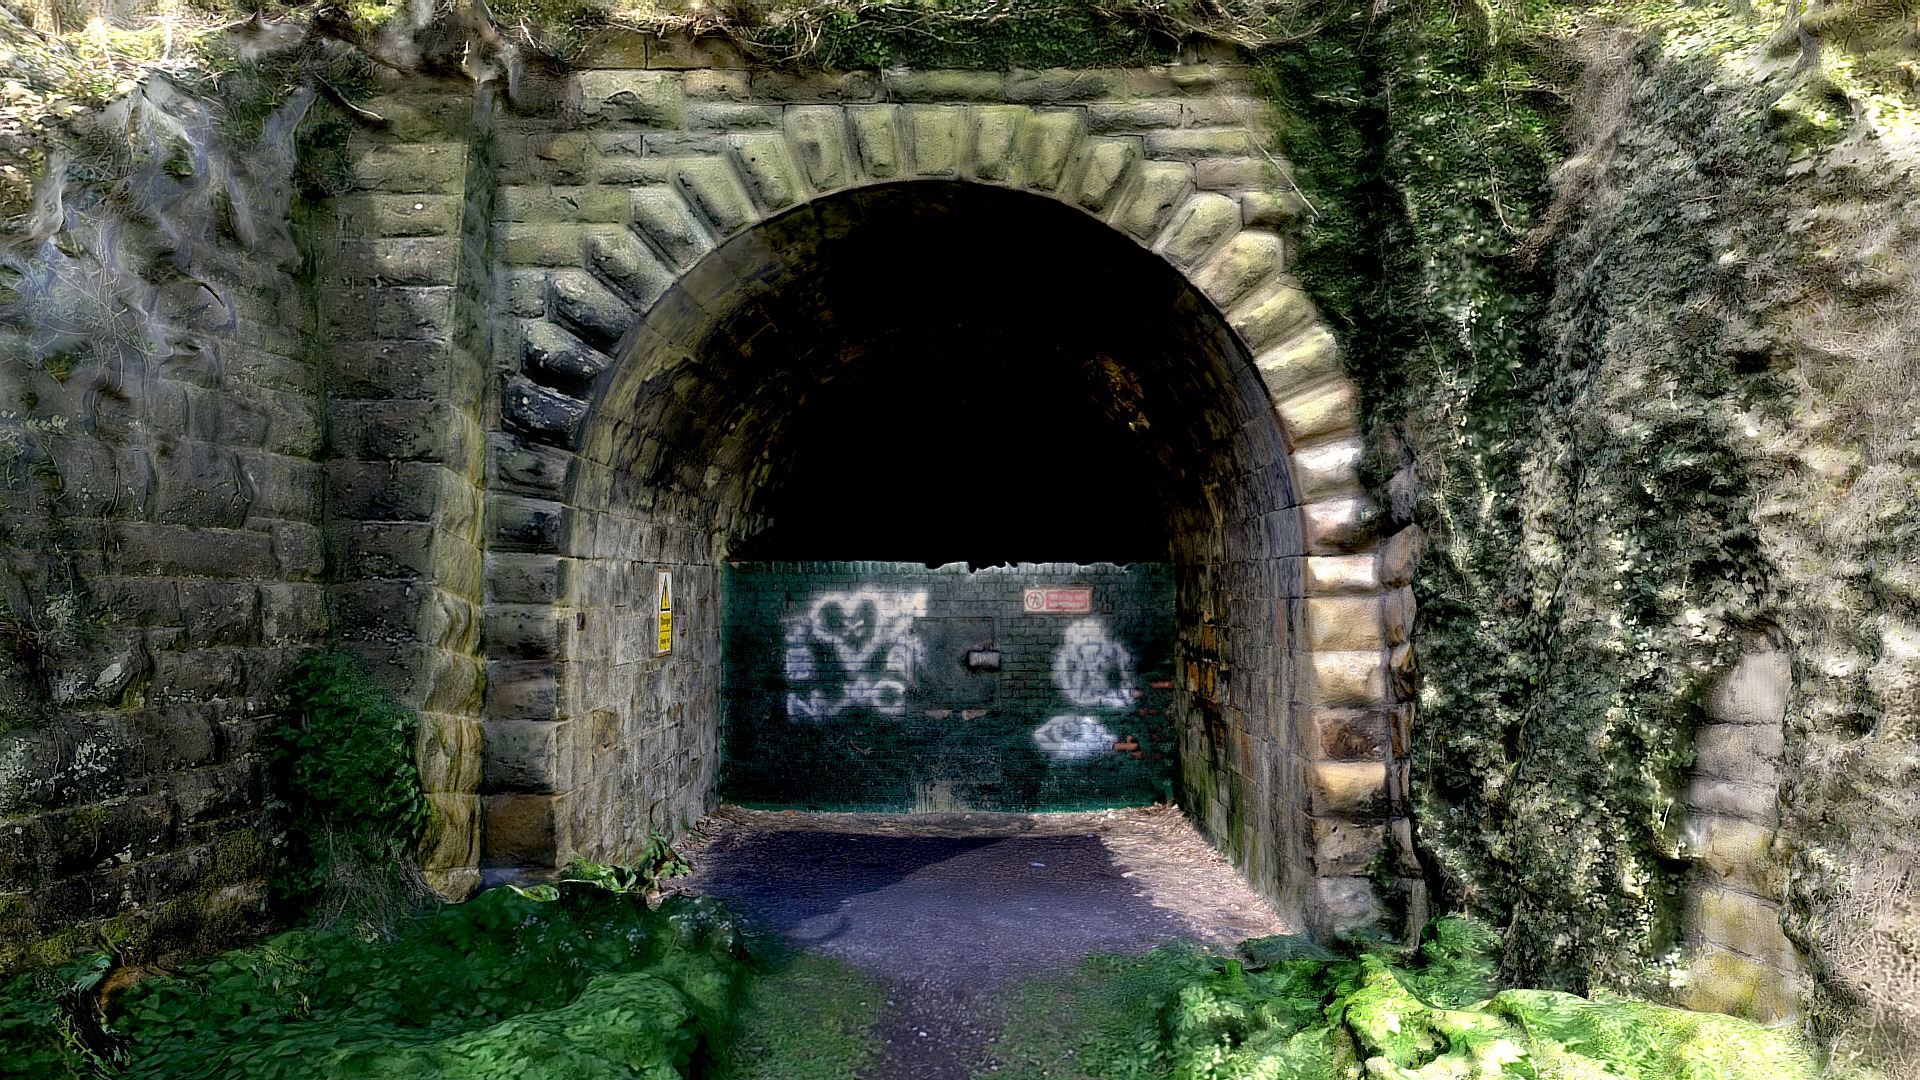 3D model NER Abandoned Tunnel - This is a 3D model of the NER Abandoned Tunnel. The 3D model is about a stone tunnel with plants growing on the walls.